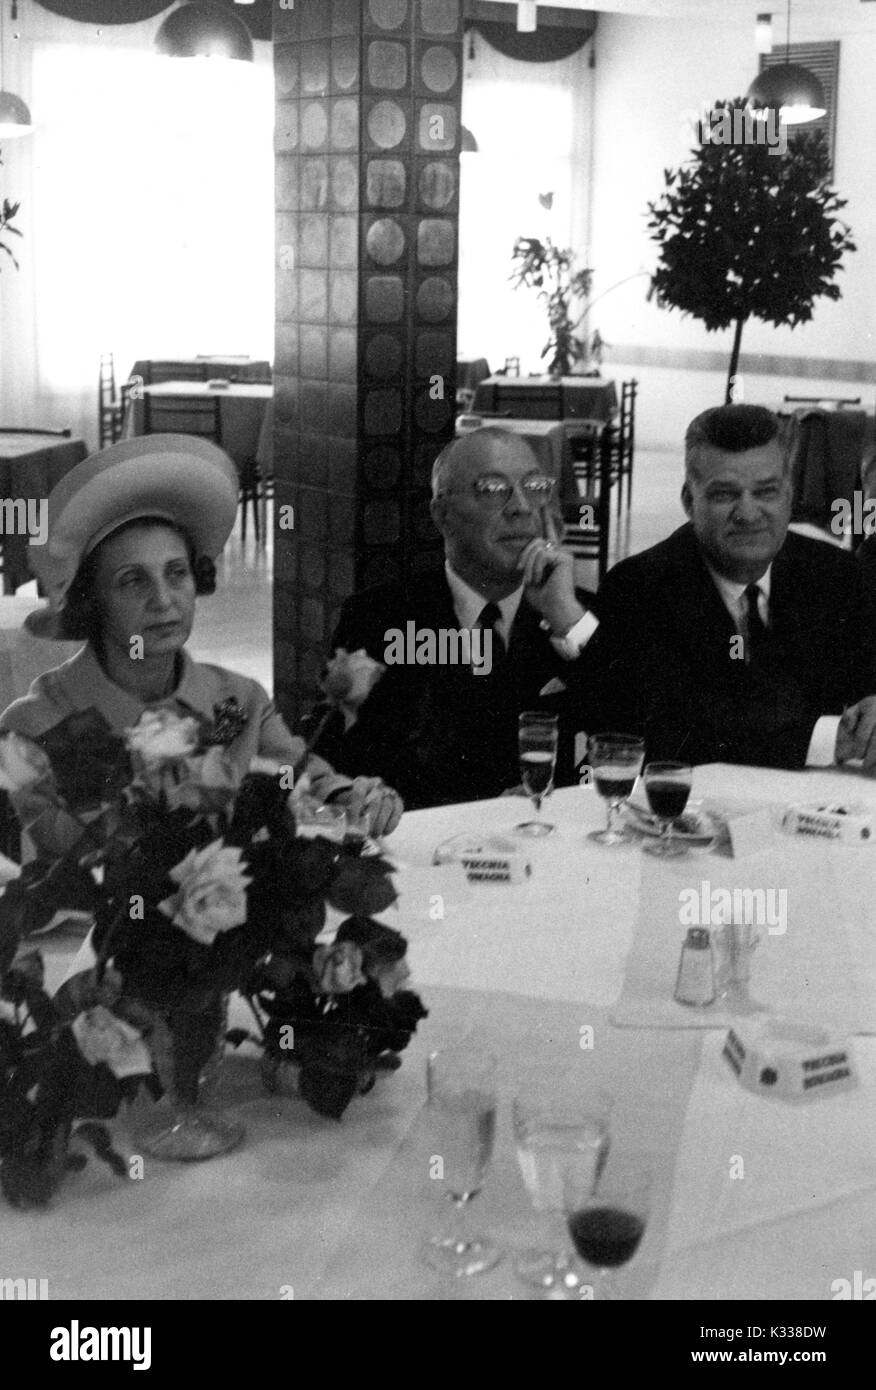 During the Associazione Italo-Americana Luncheon at the School of Advanced International Studies (SAIS) in Washington, DC, President of Johns Hopkins University Milton Stover Eisenhower -- around 62 years of age -- sits at a table holding his hand to his chin, with his wife to his right wearing a hat and smoking a cigarette, and another guest to his left and wine glasses spread around a bouquet on the table, Washington, DC, 1965. Stock Photo